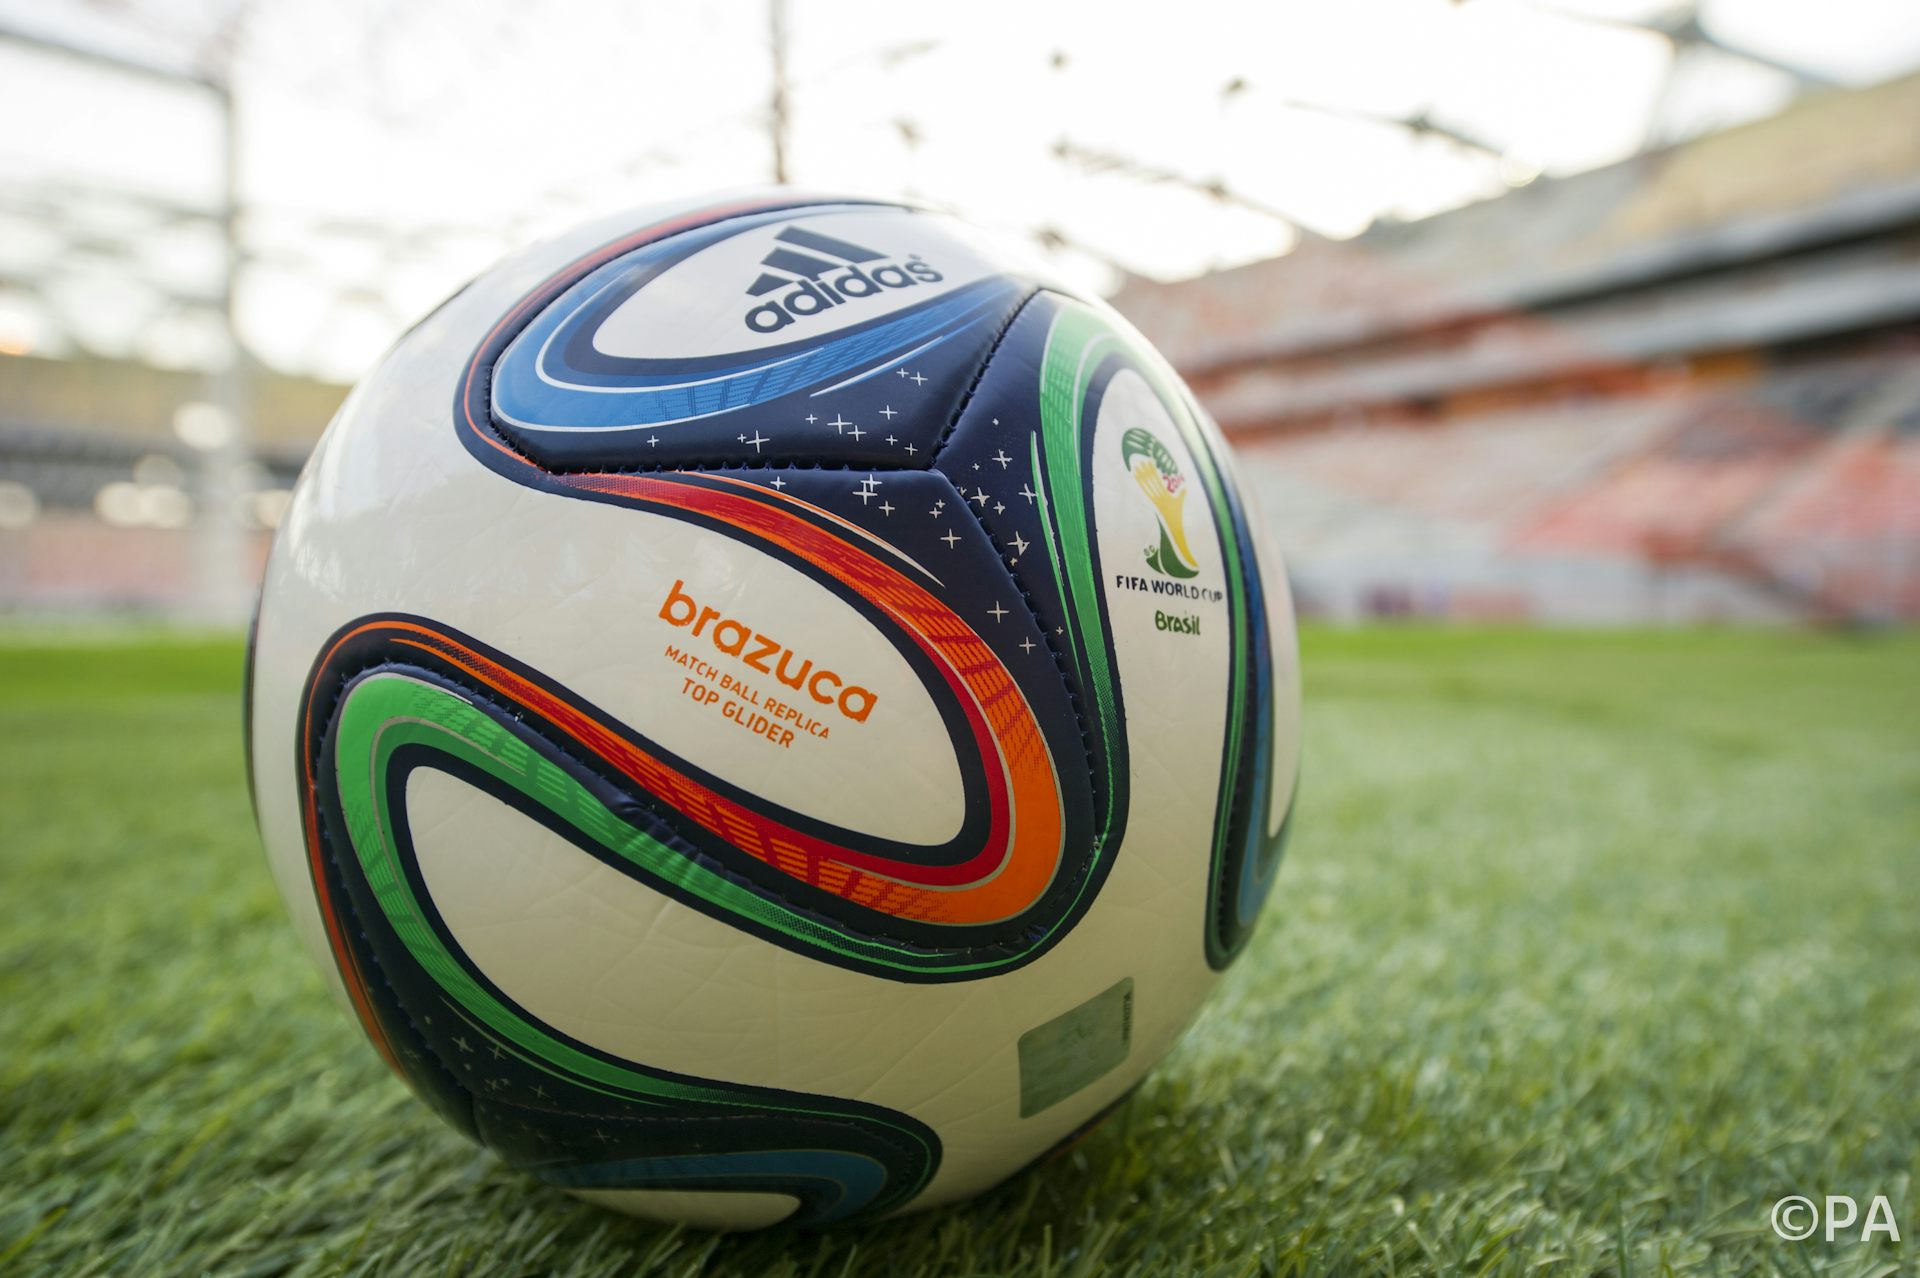 Hard Evidence: how will the 2014 World Cup ball swerve?